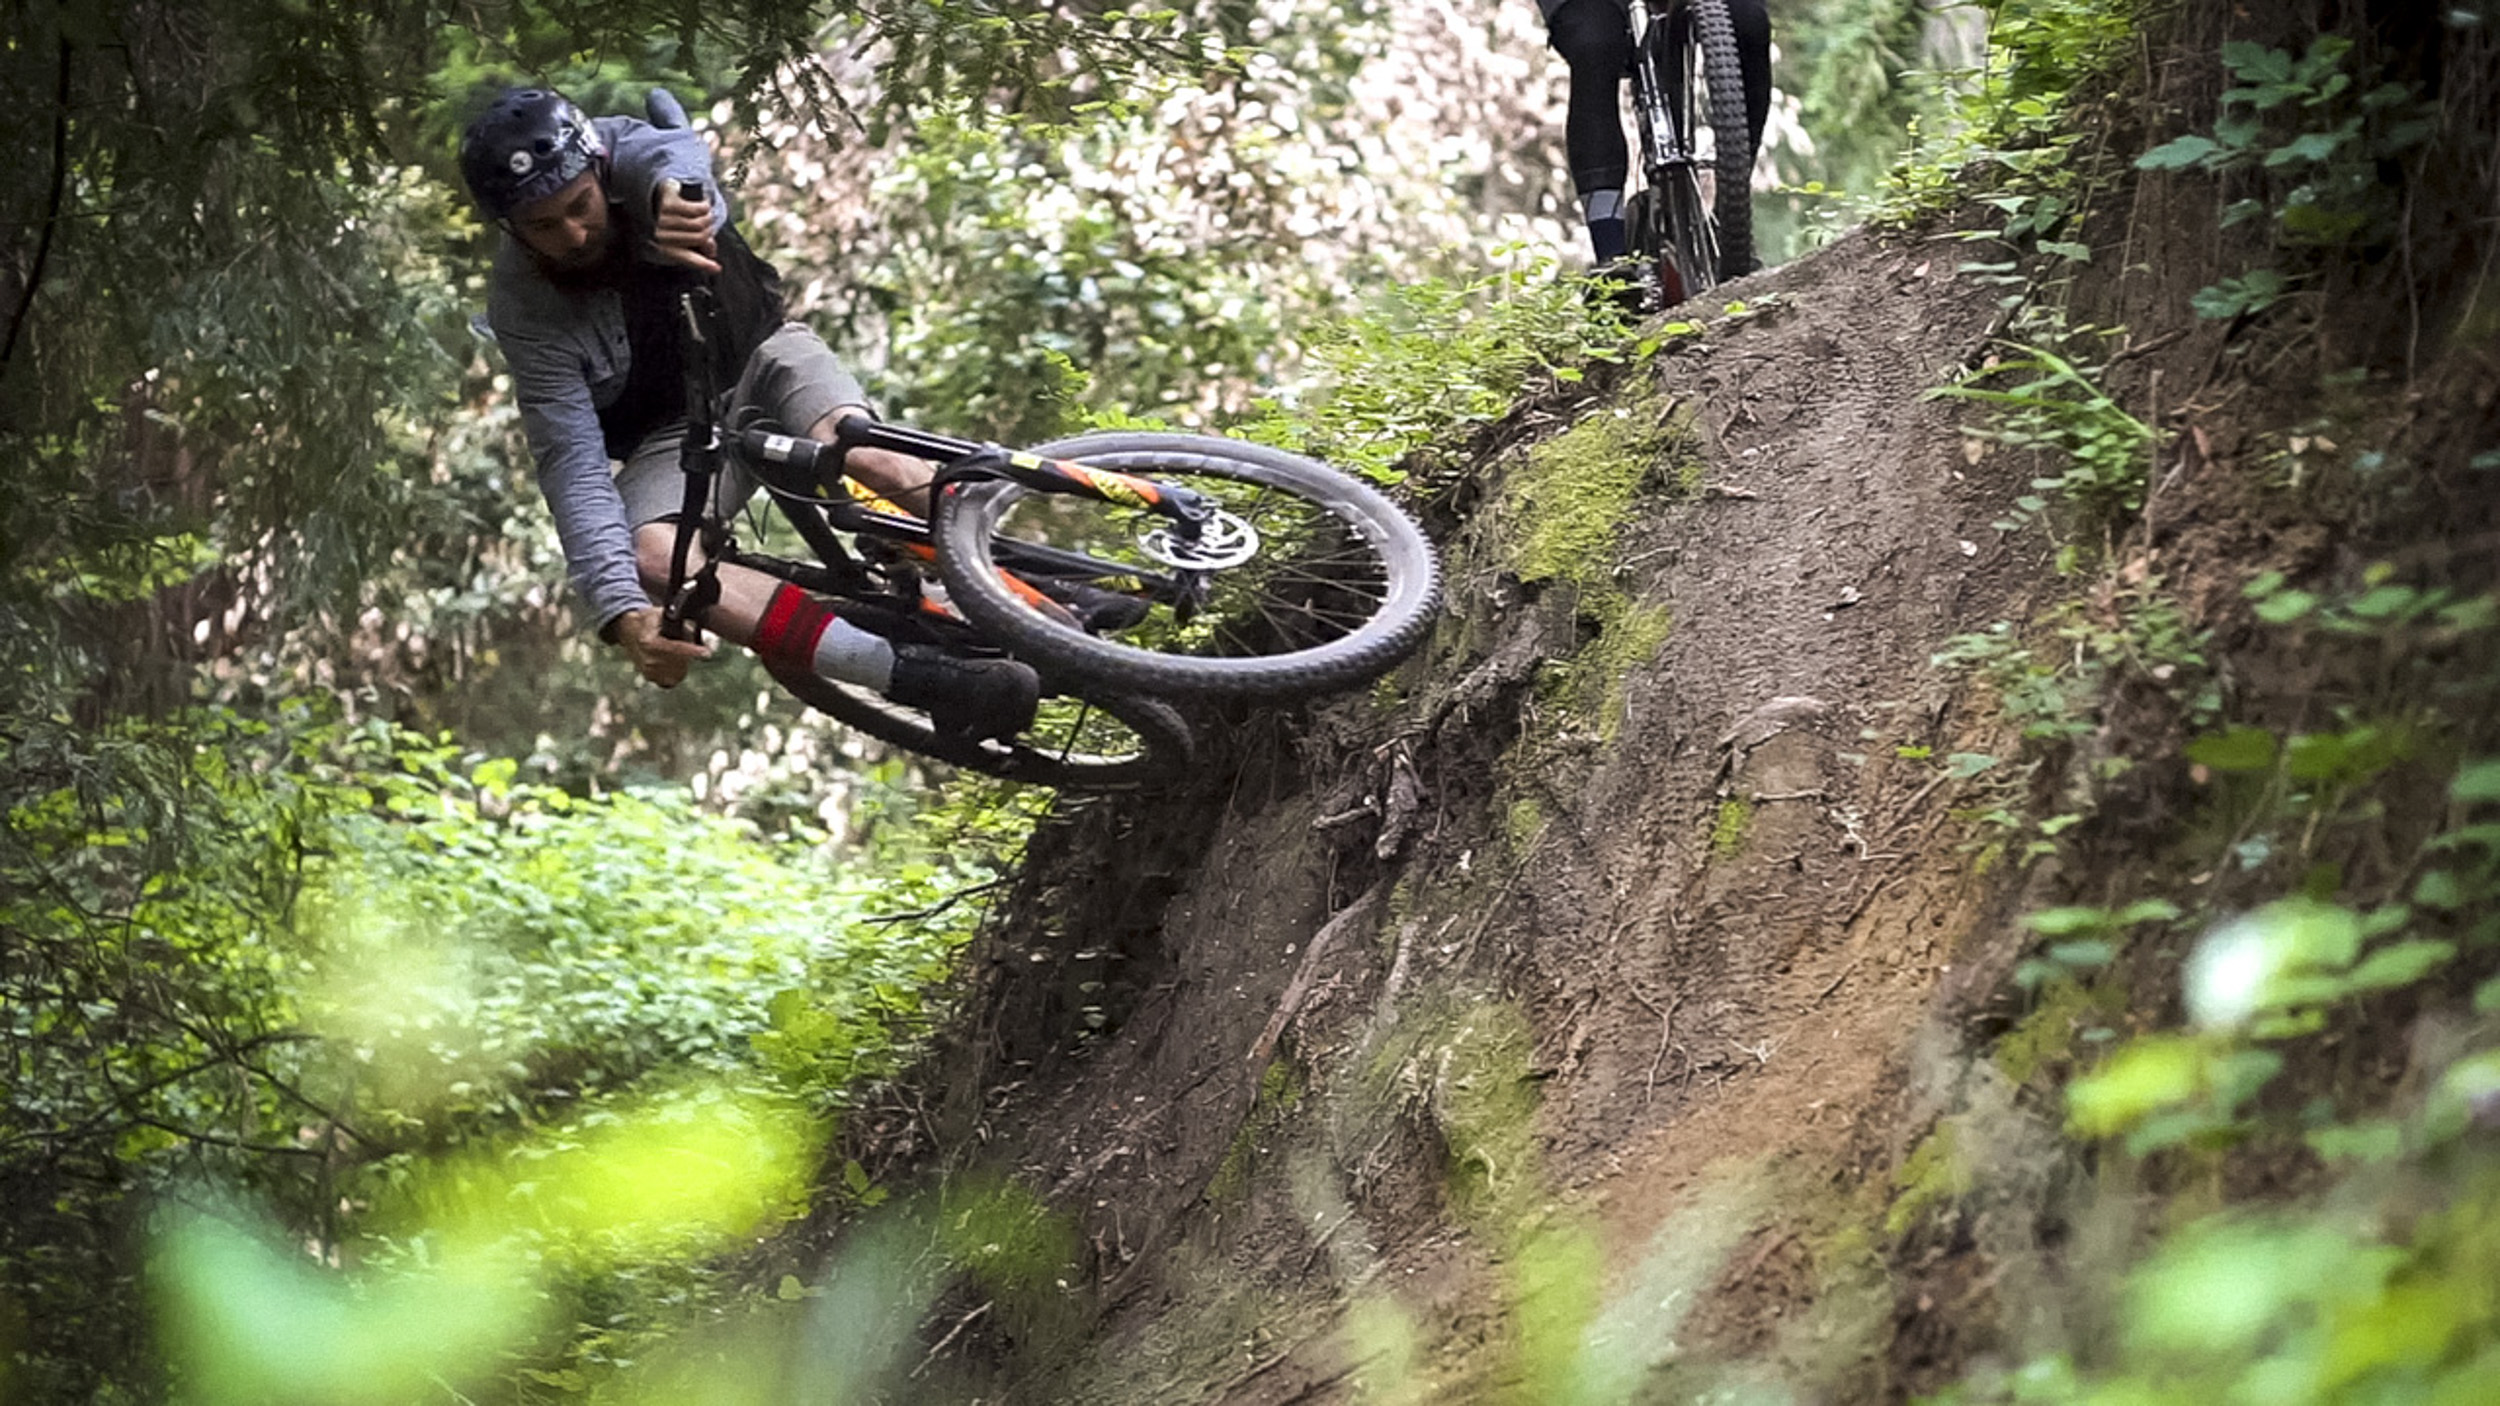 Airing berms on the squish bike